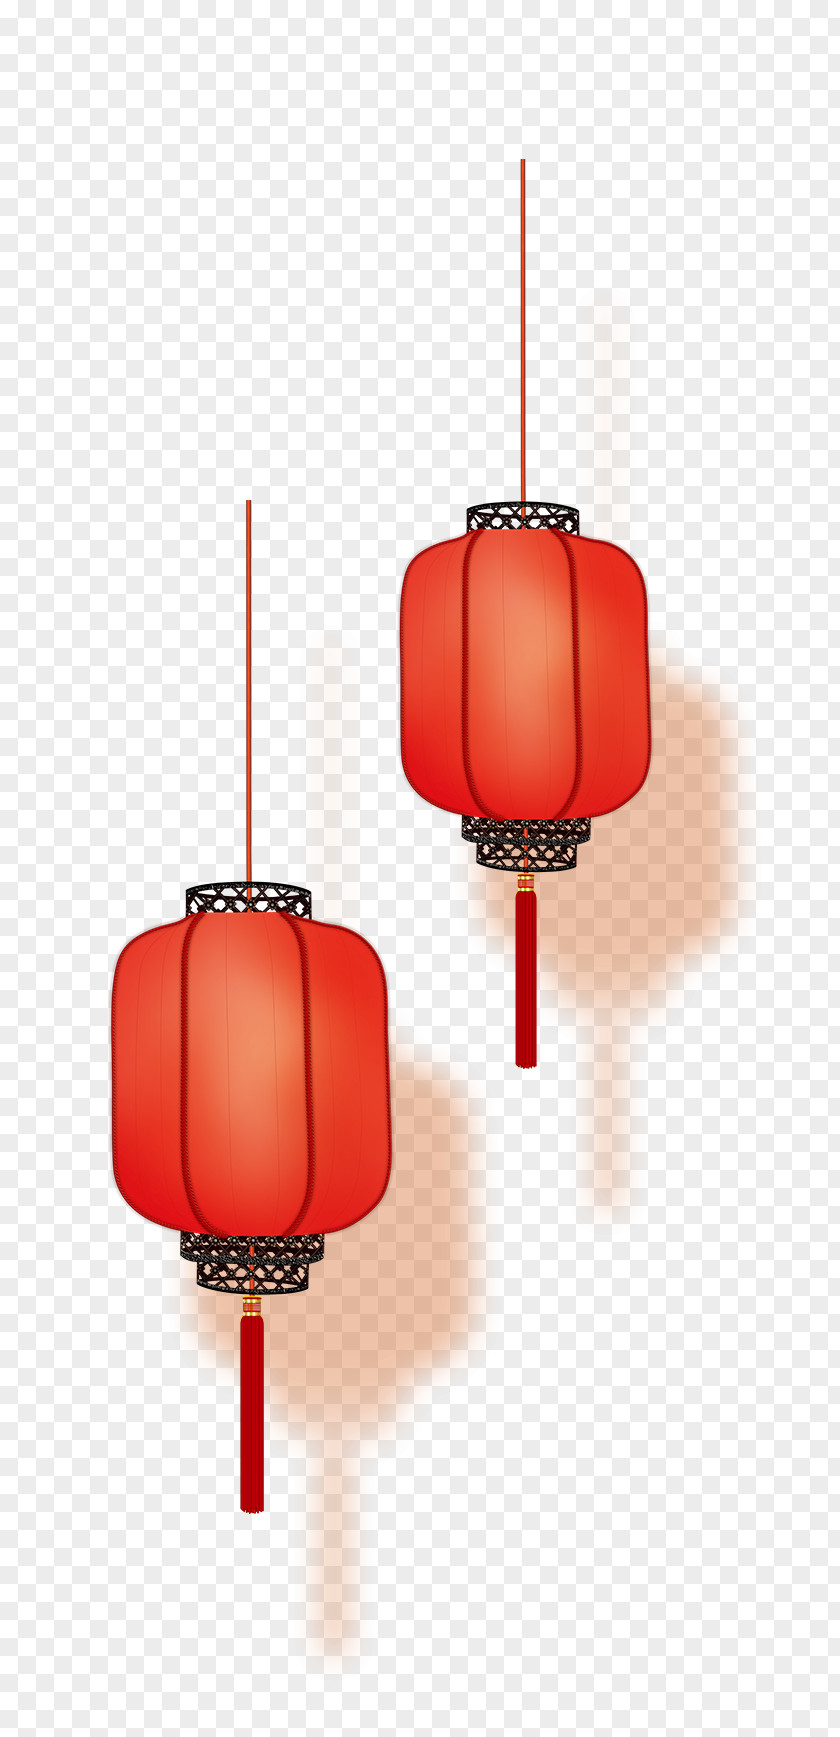 Chinese New Year Lantern Festival Clip Art Image PNG